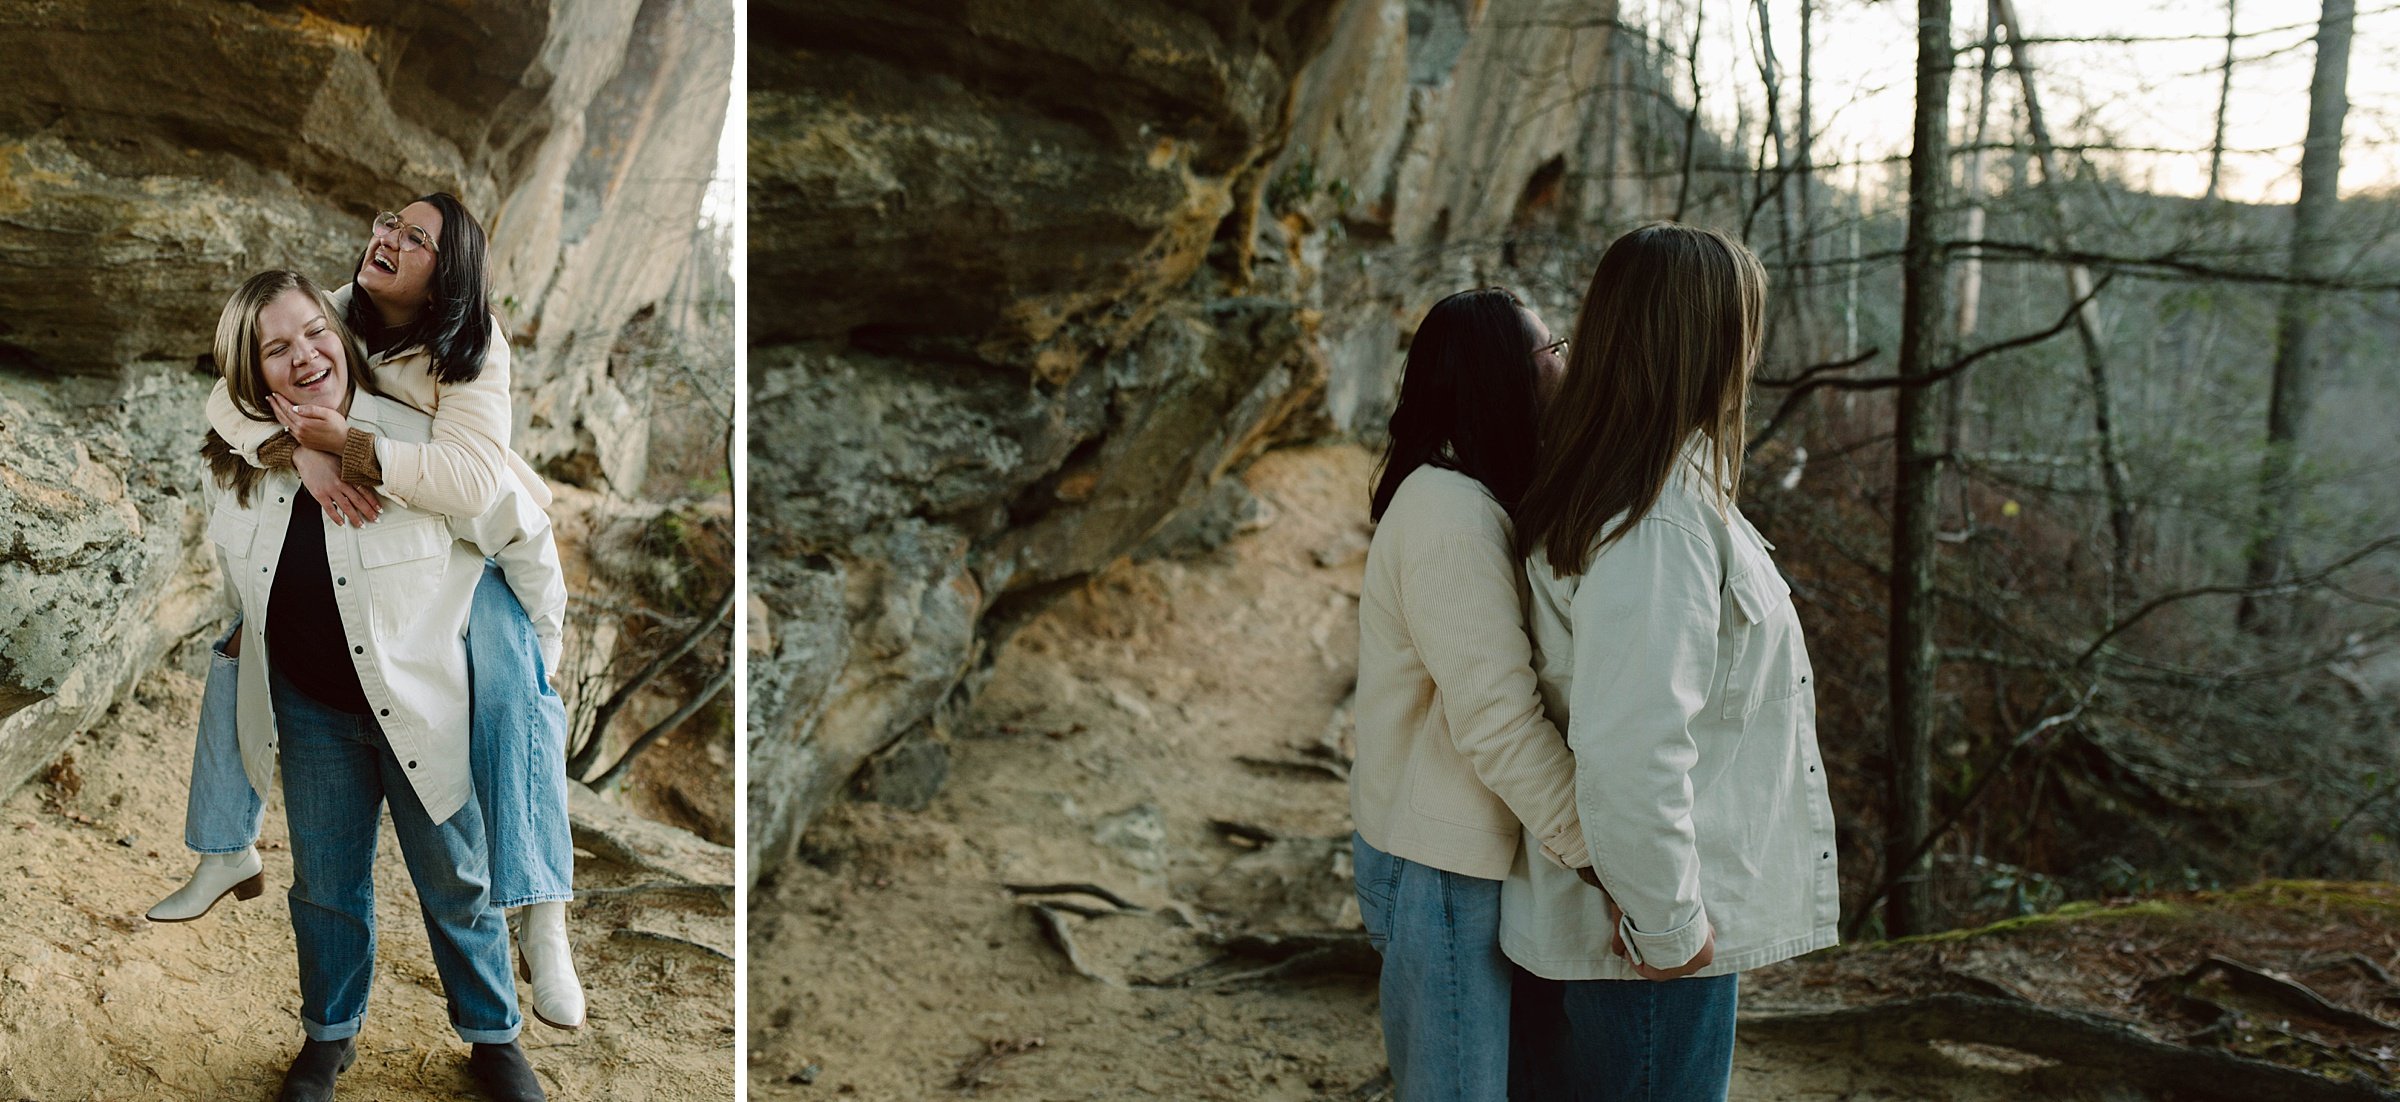 Late Autumn Proposal & Engagement Session in Red River Gorge- Kentucky133.jpg